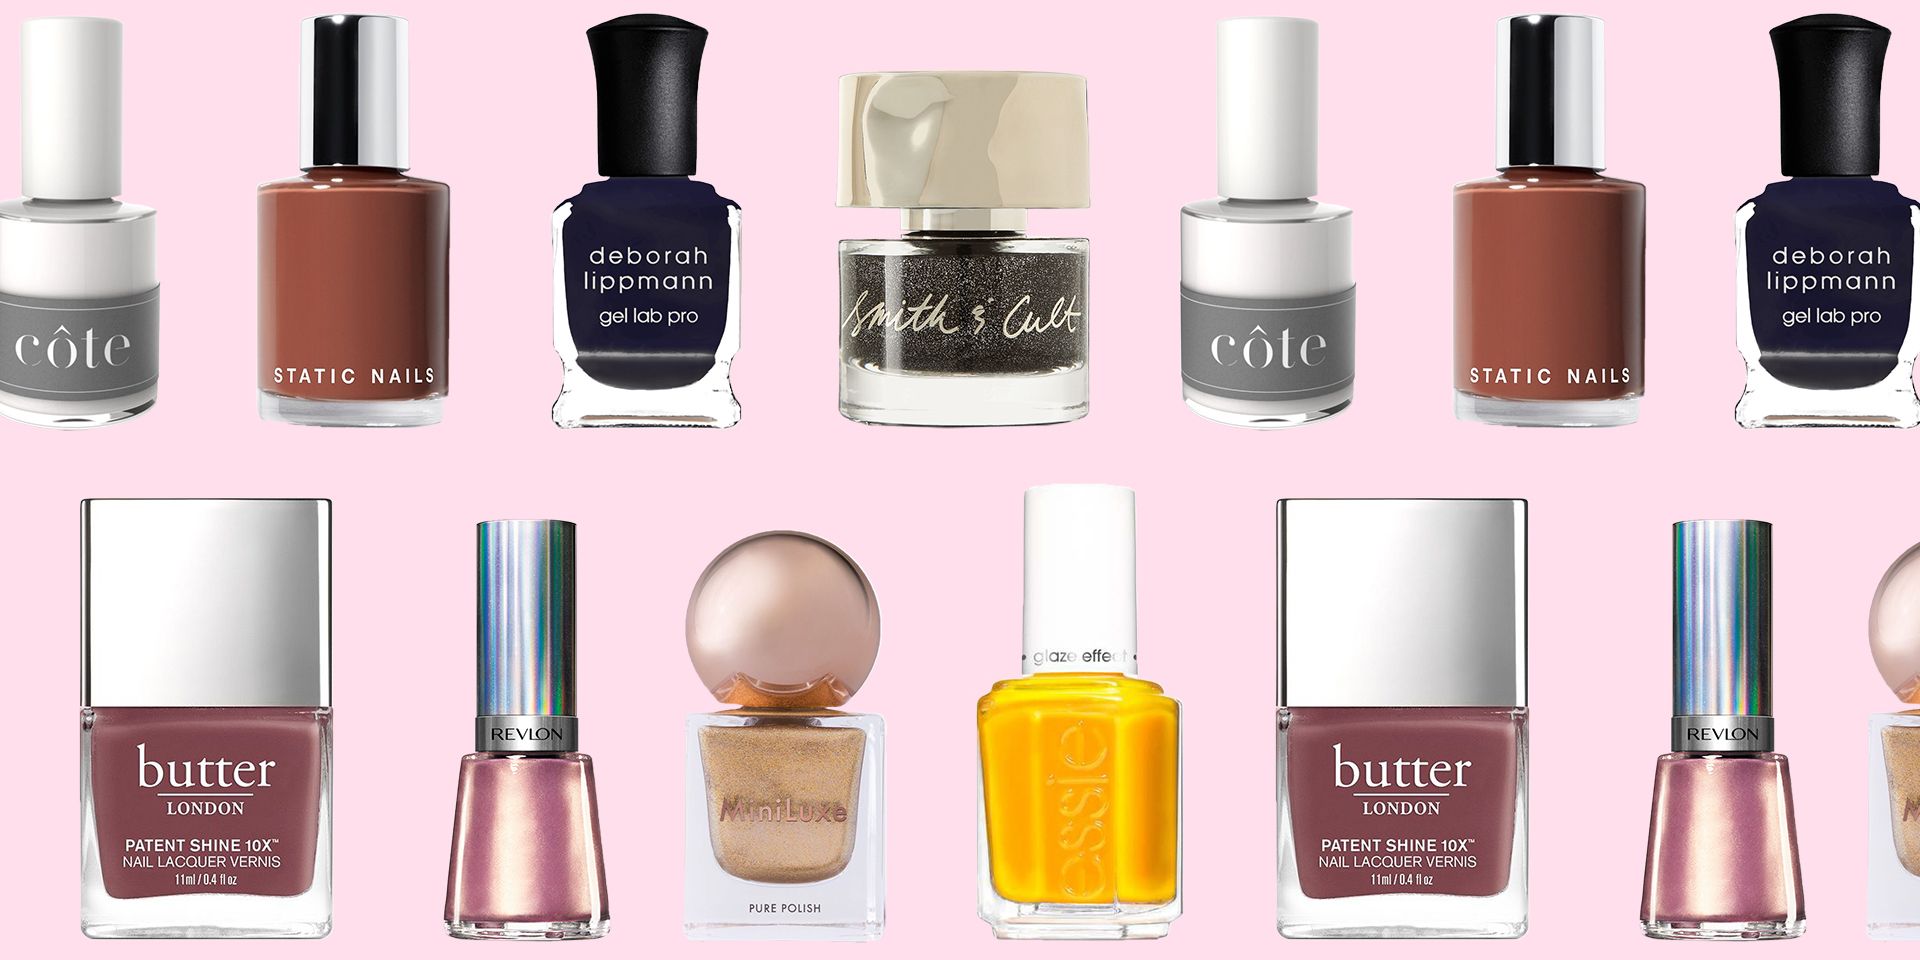 20 Best Fall Nail Colors 2020 - Autumn 